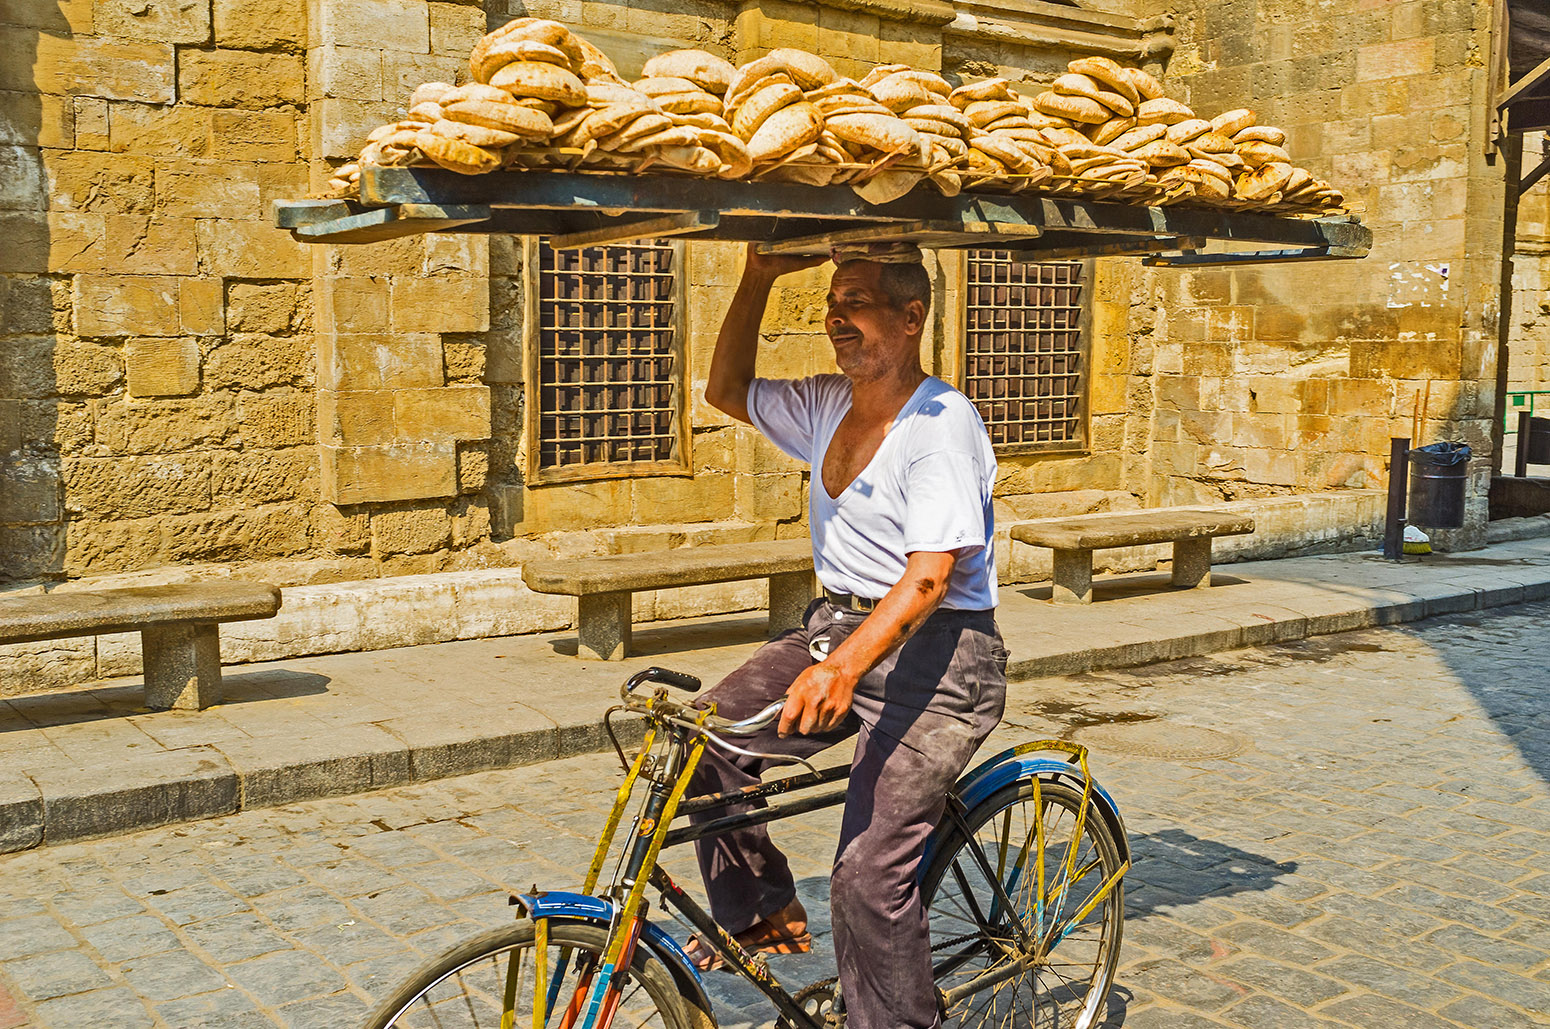 A man delivers flatbread in Cairo, Egypt, where bread is “aish” (life) and was once the cradle of agriculture and is today one of the world’s largest importers of wheat.